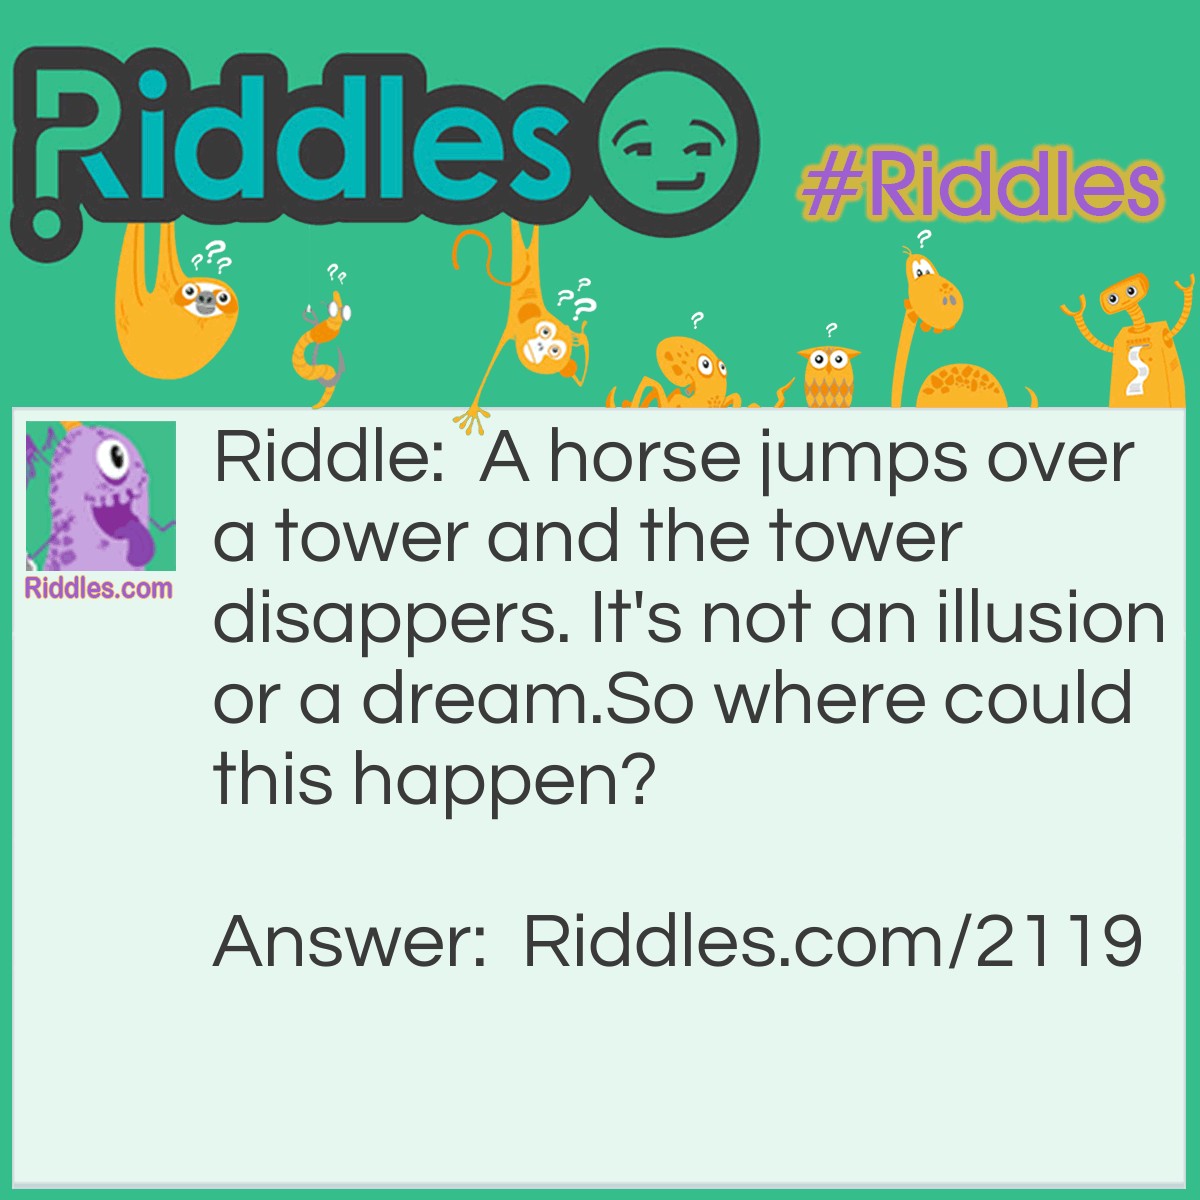 Riddle: A horse jumps over a tower and the tower disappears. It's not an illusion or a dream.
So where could this happen? Answer: On a chessboard.